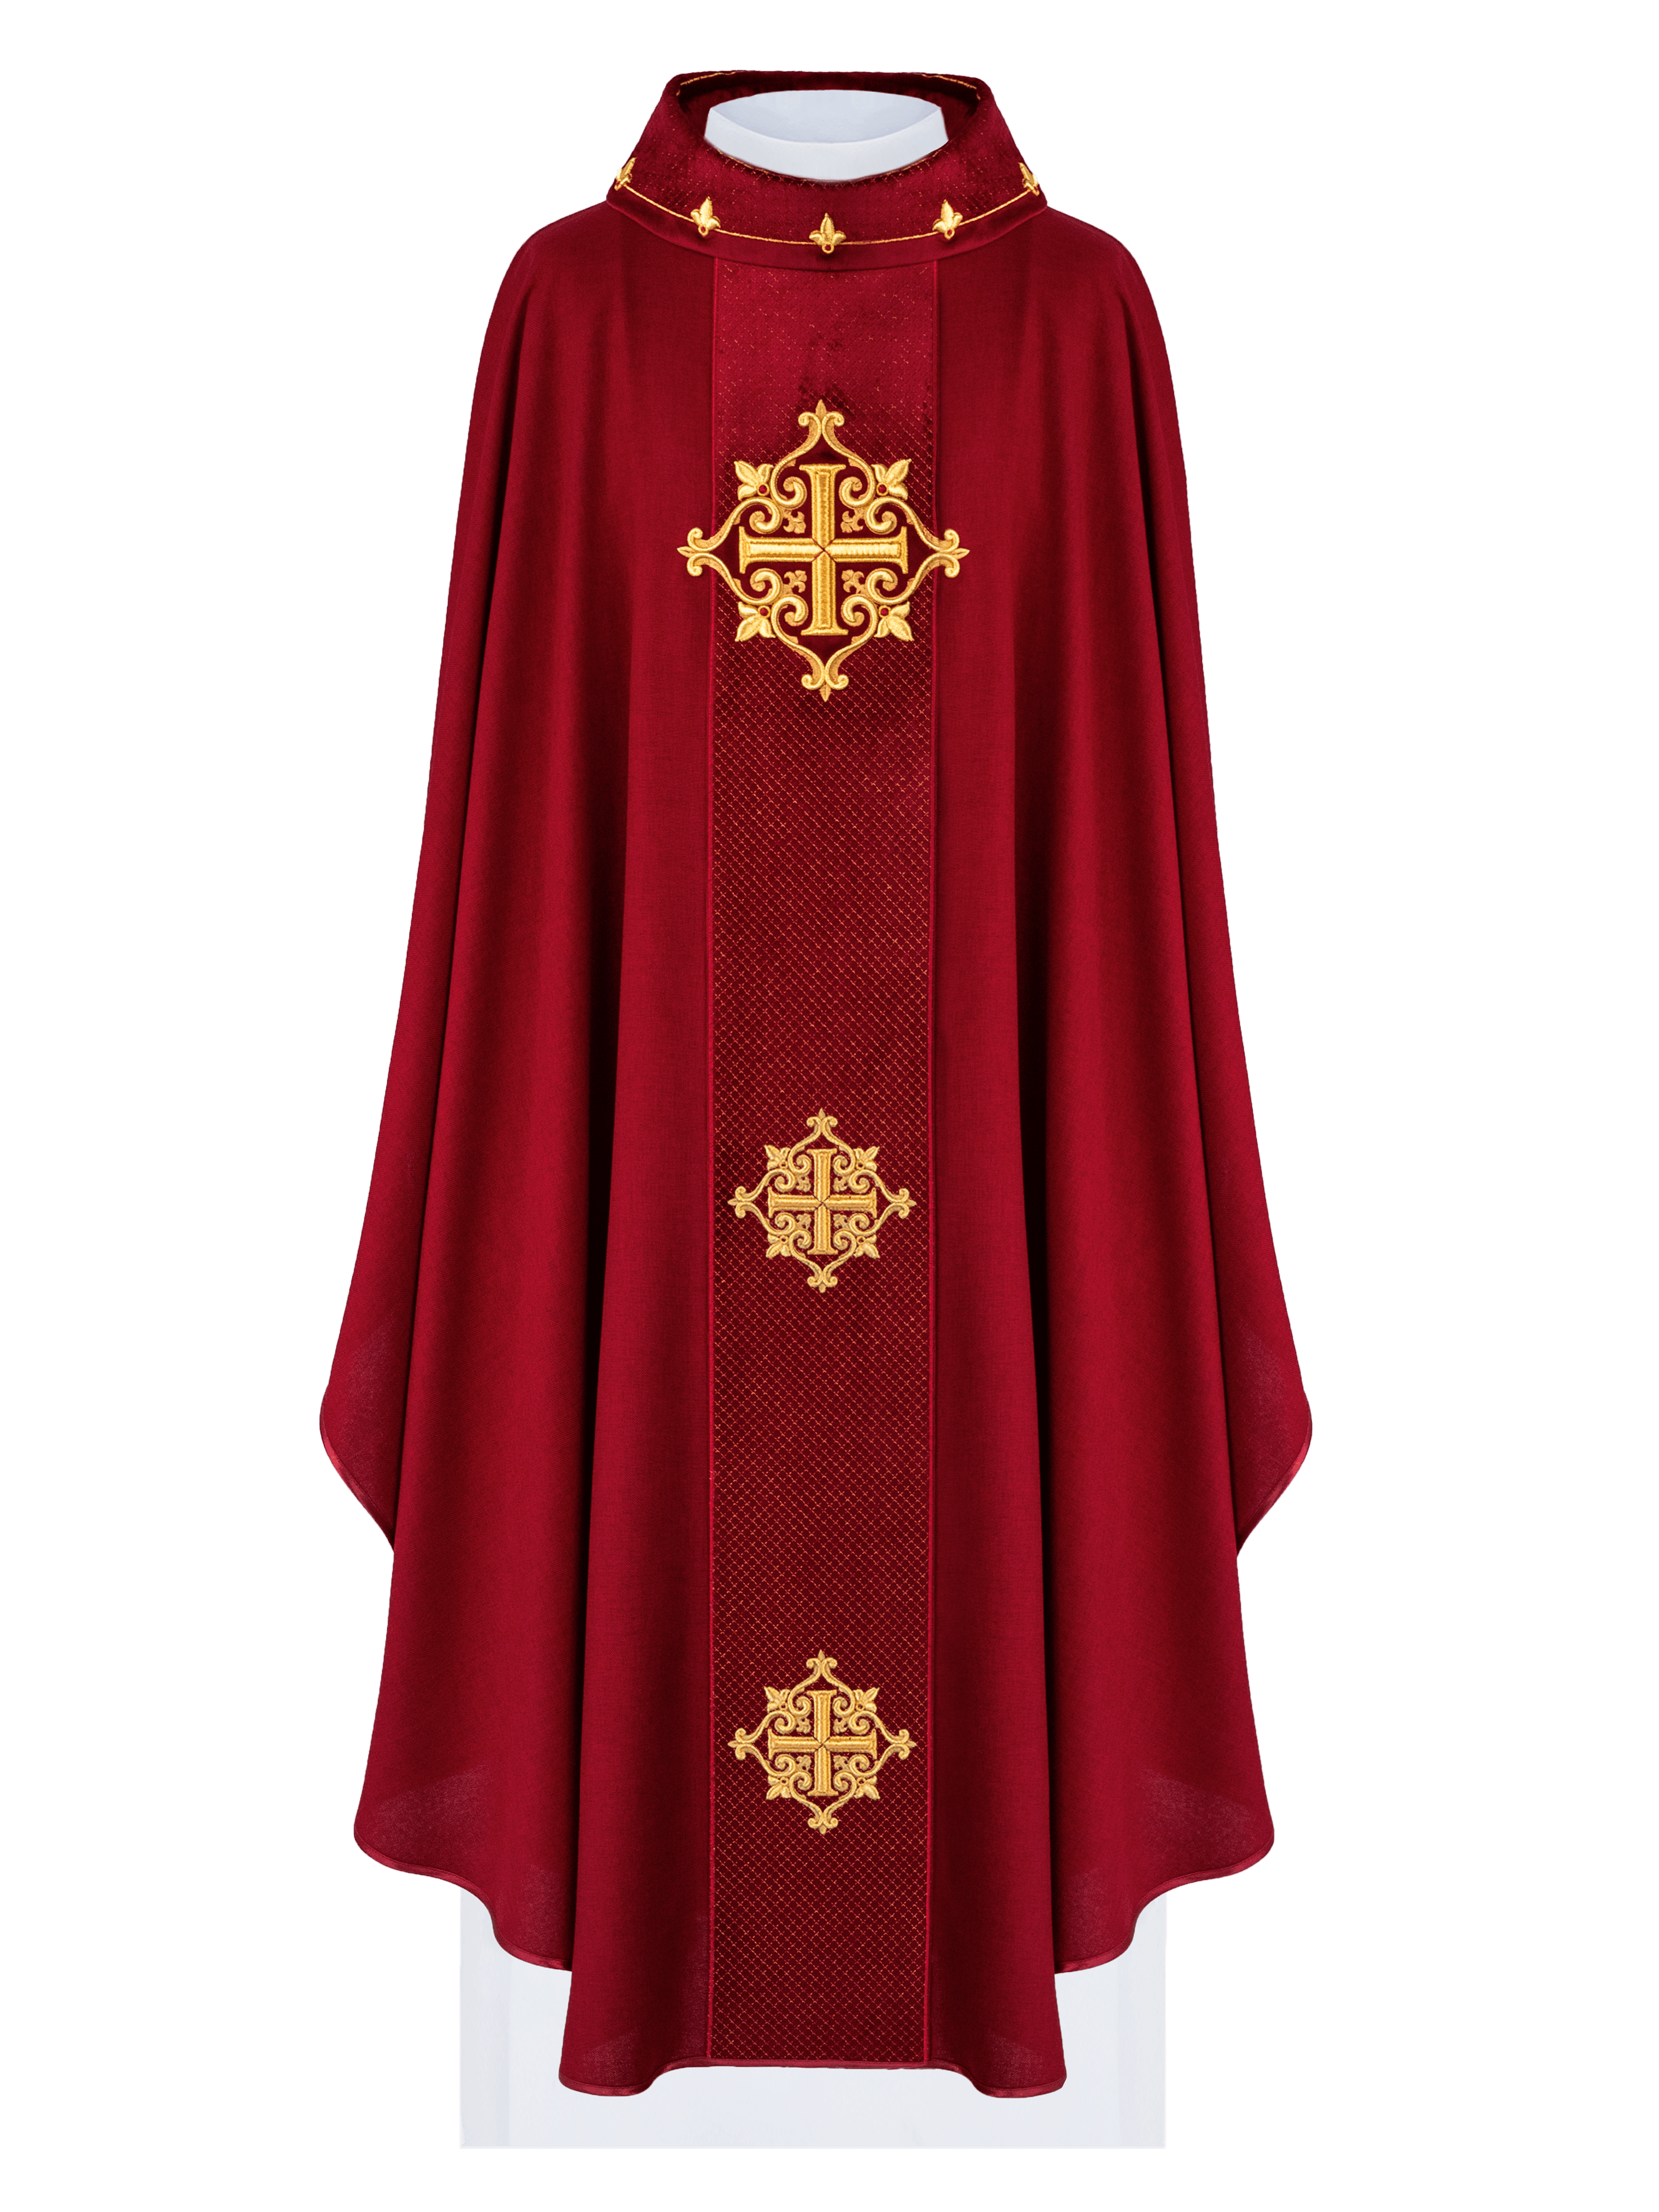 Chasuble with red velvet belt and embroidery of crosses